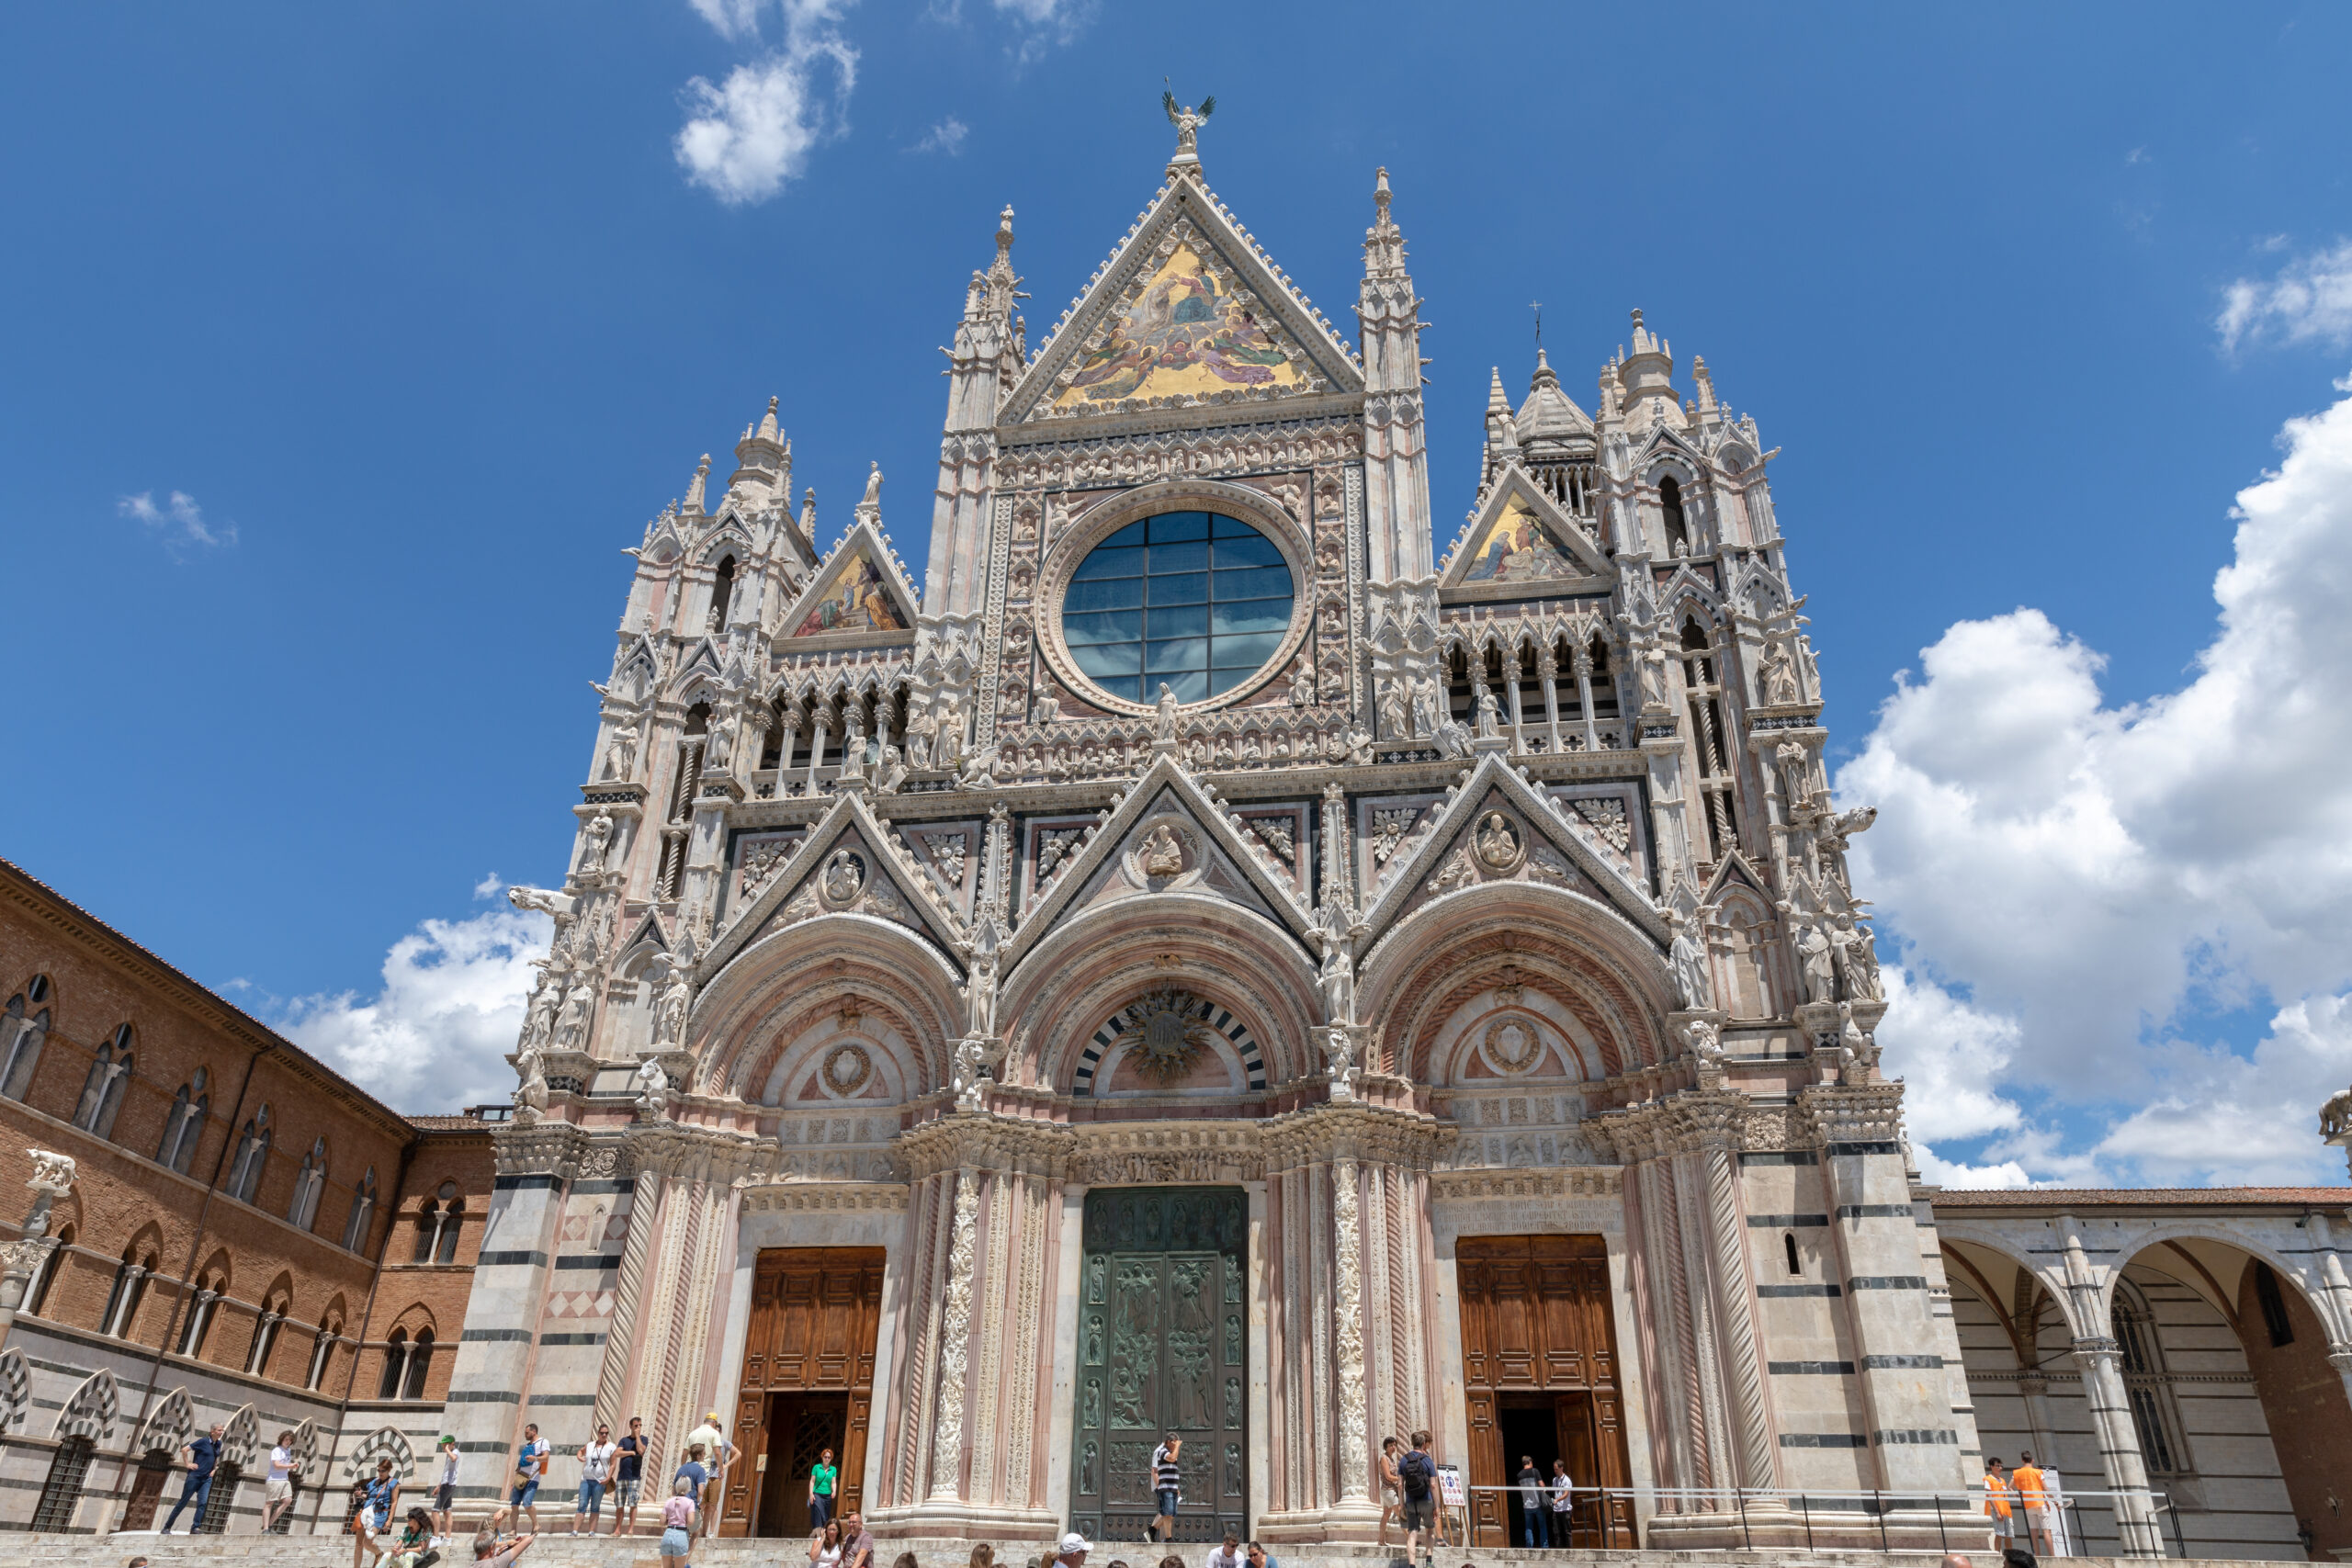 The Dome in Siena, the famous Gothic cathedral in Tuscany